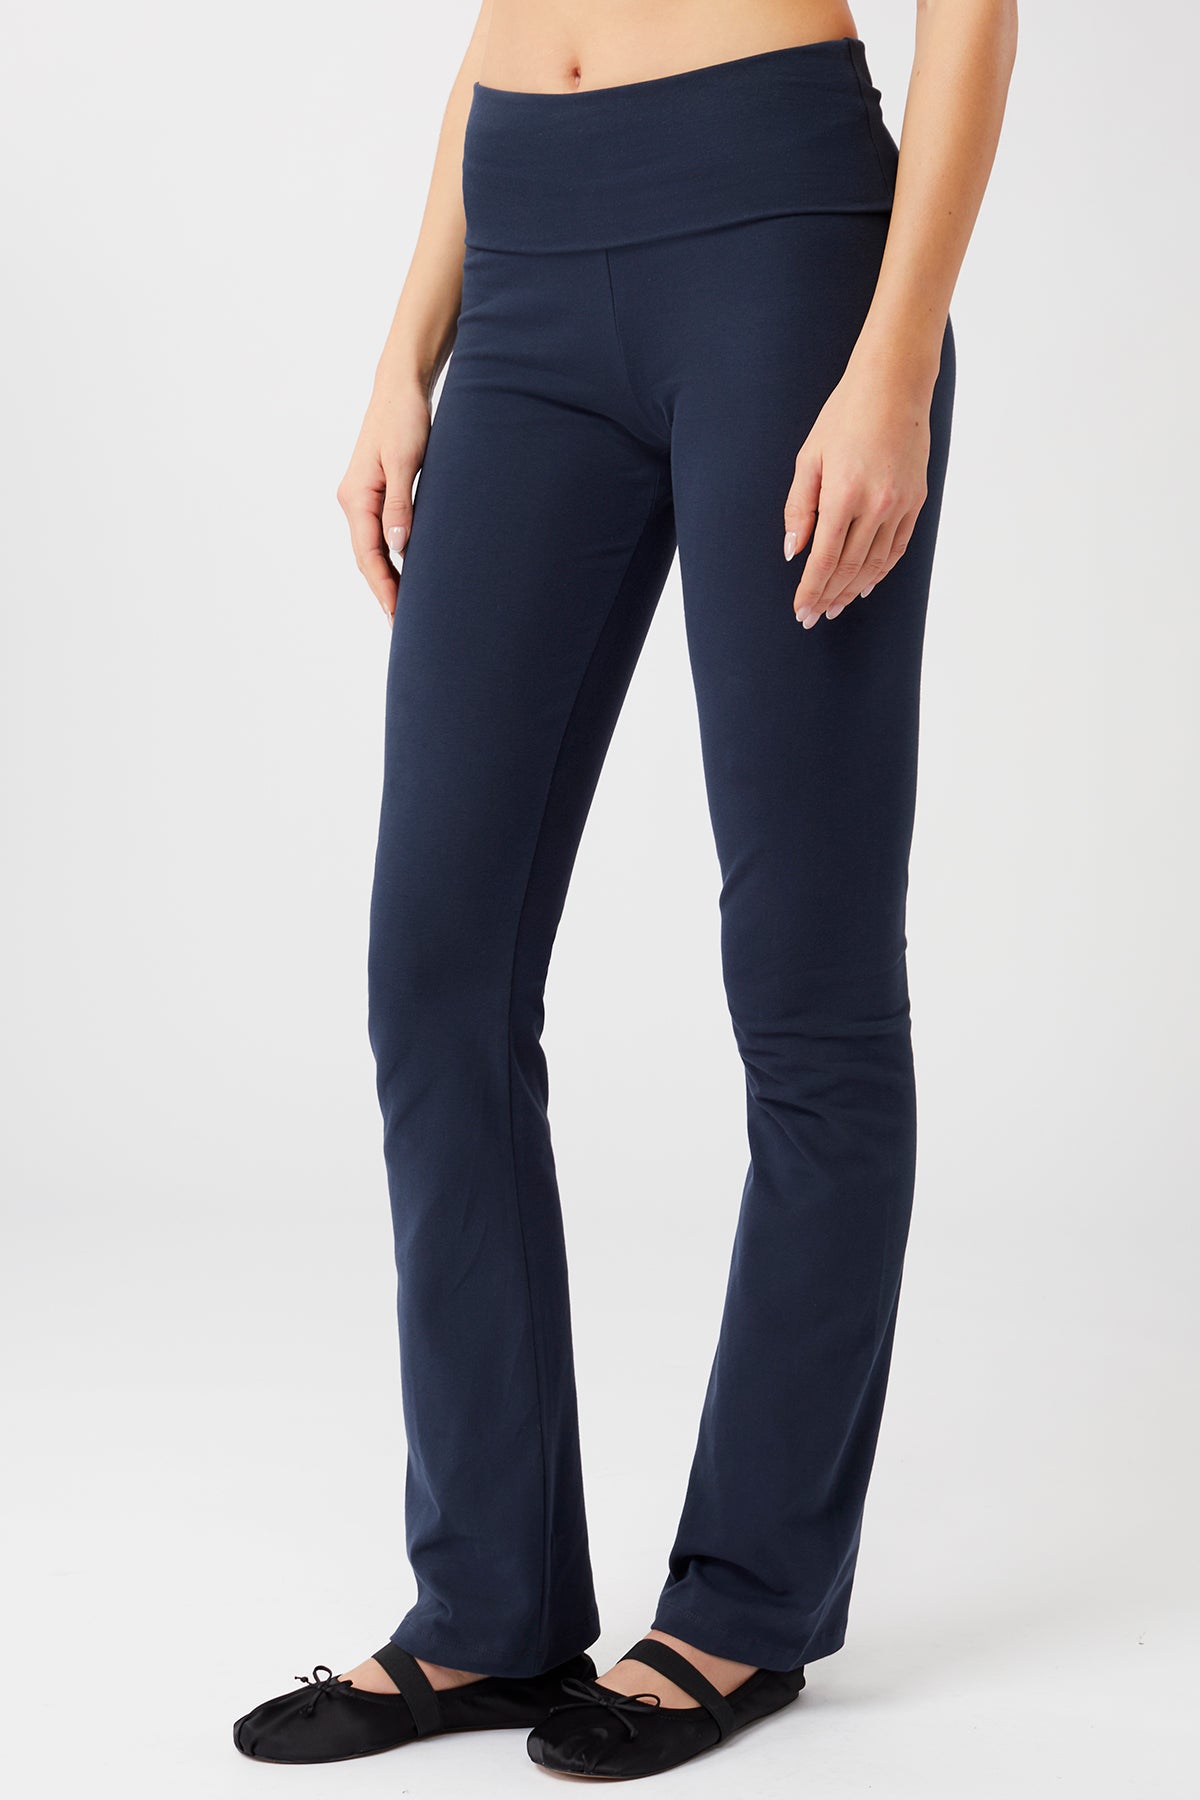 Mandala Flared Sports Pants for women in the color Saphir